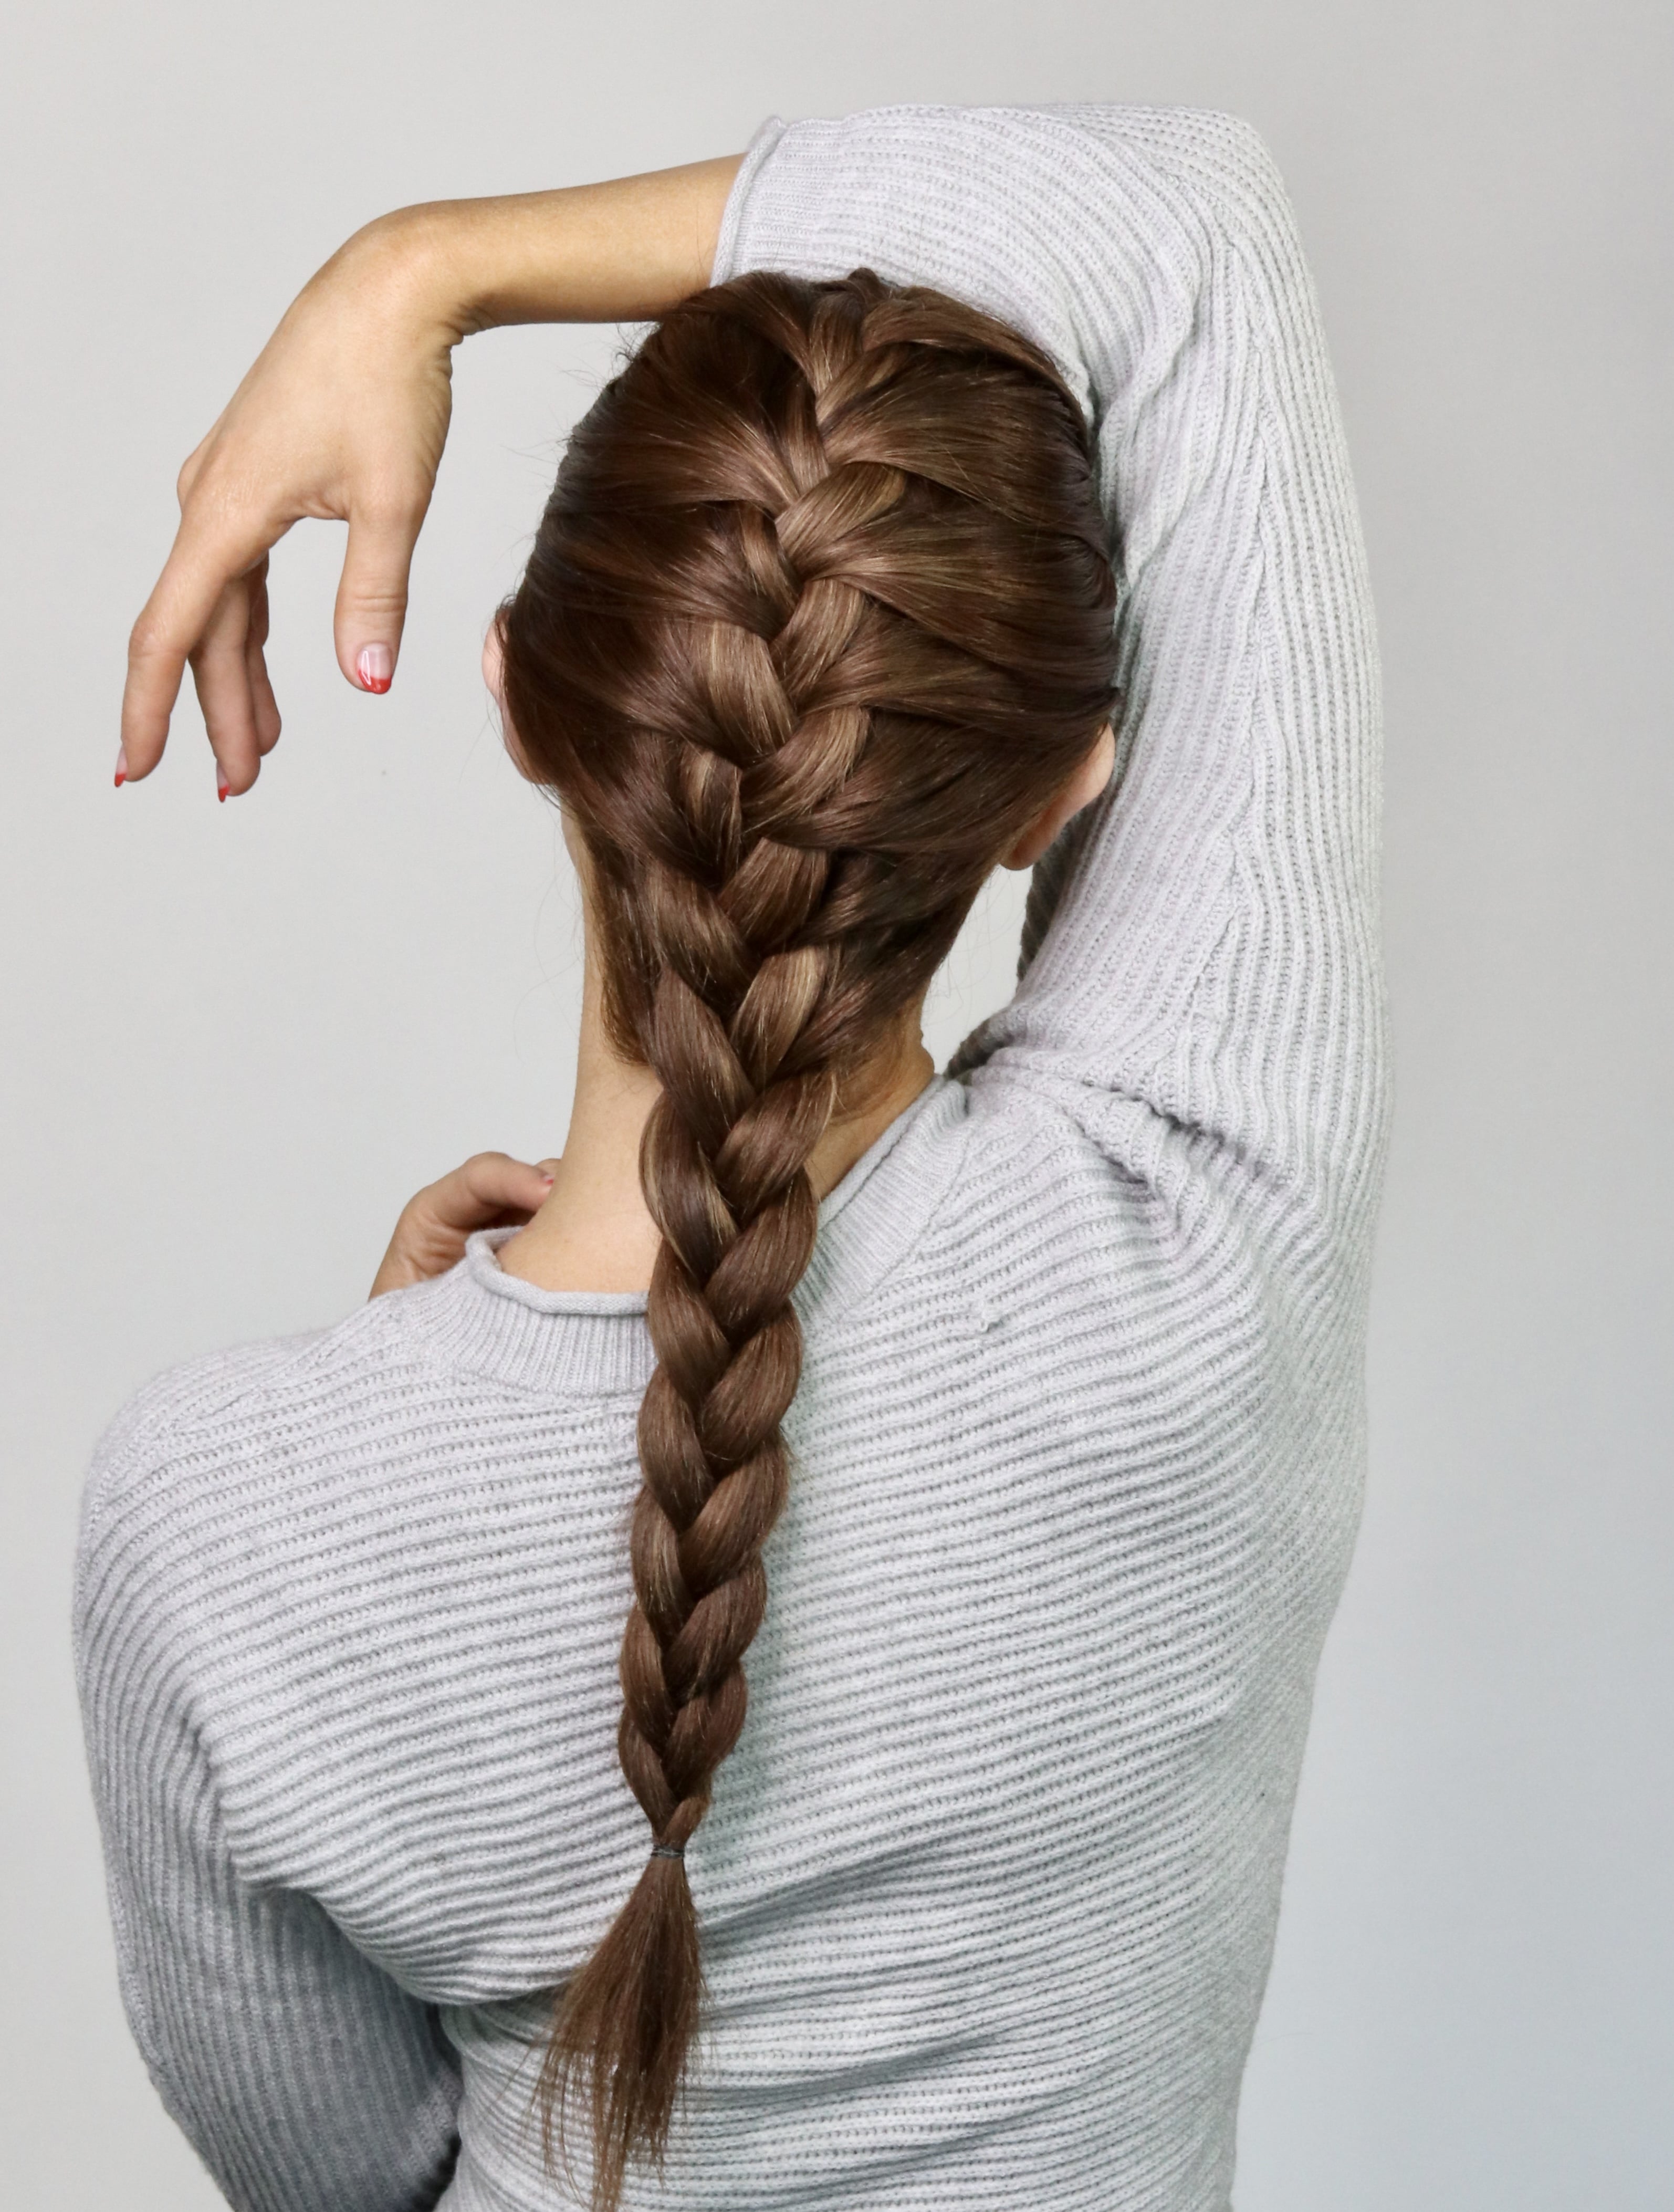 12 Best Hair Styling Tips - How To Style Your Hair